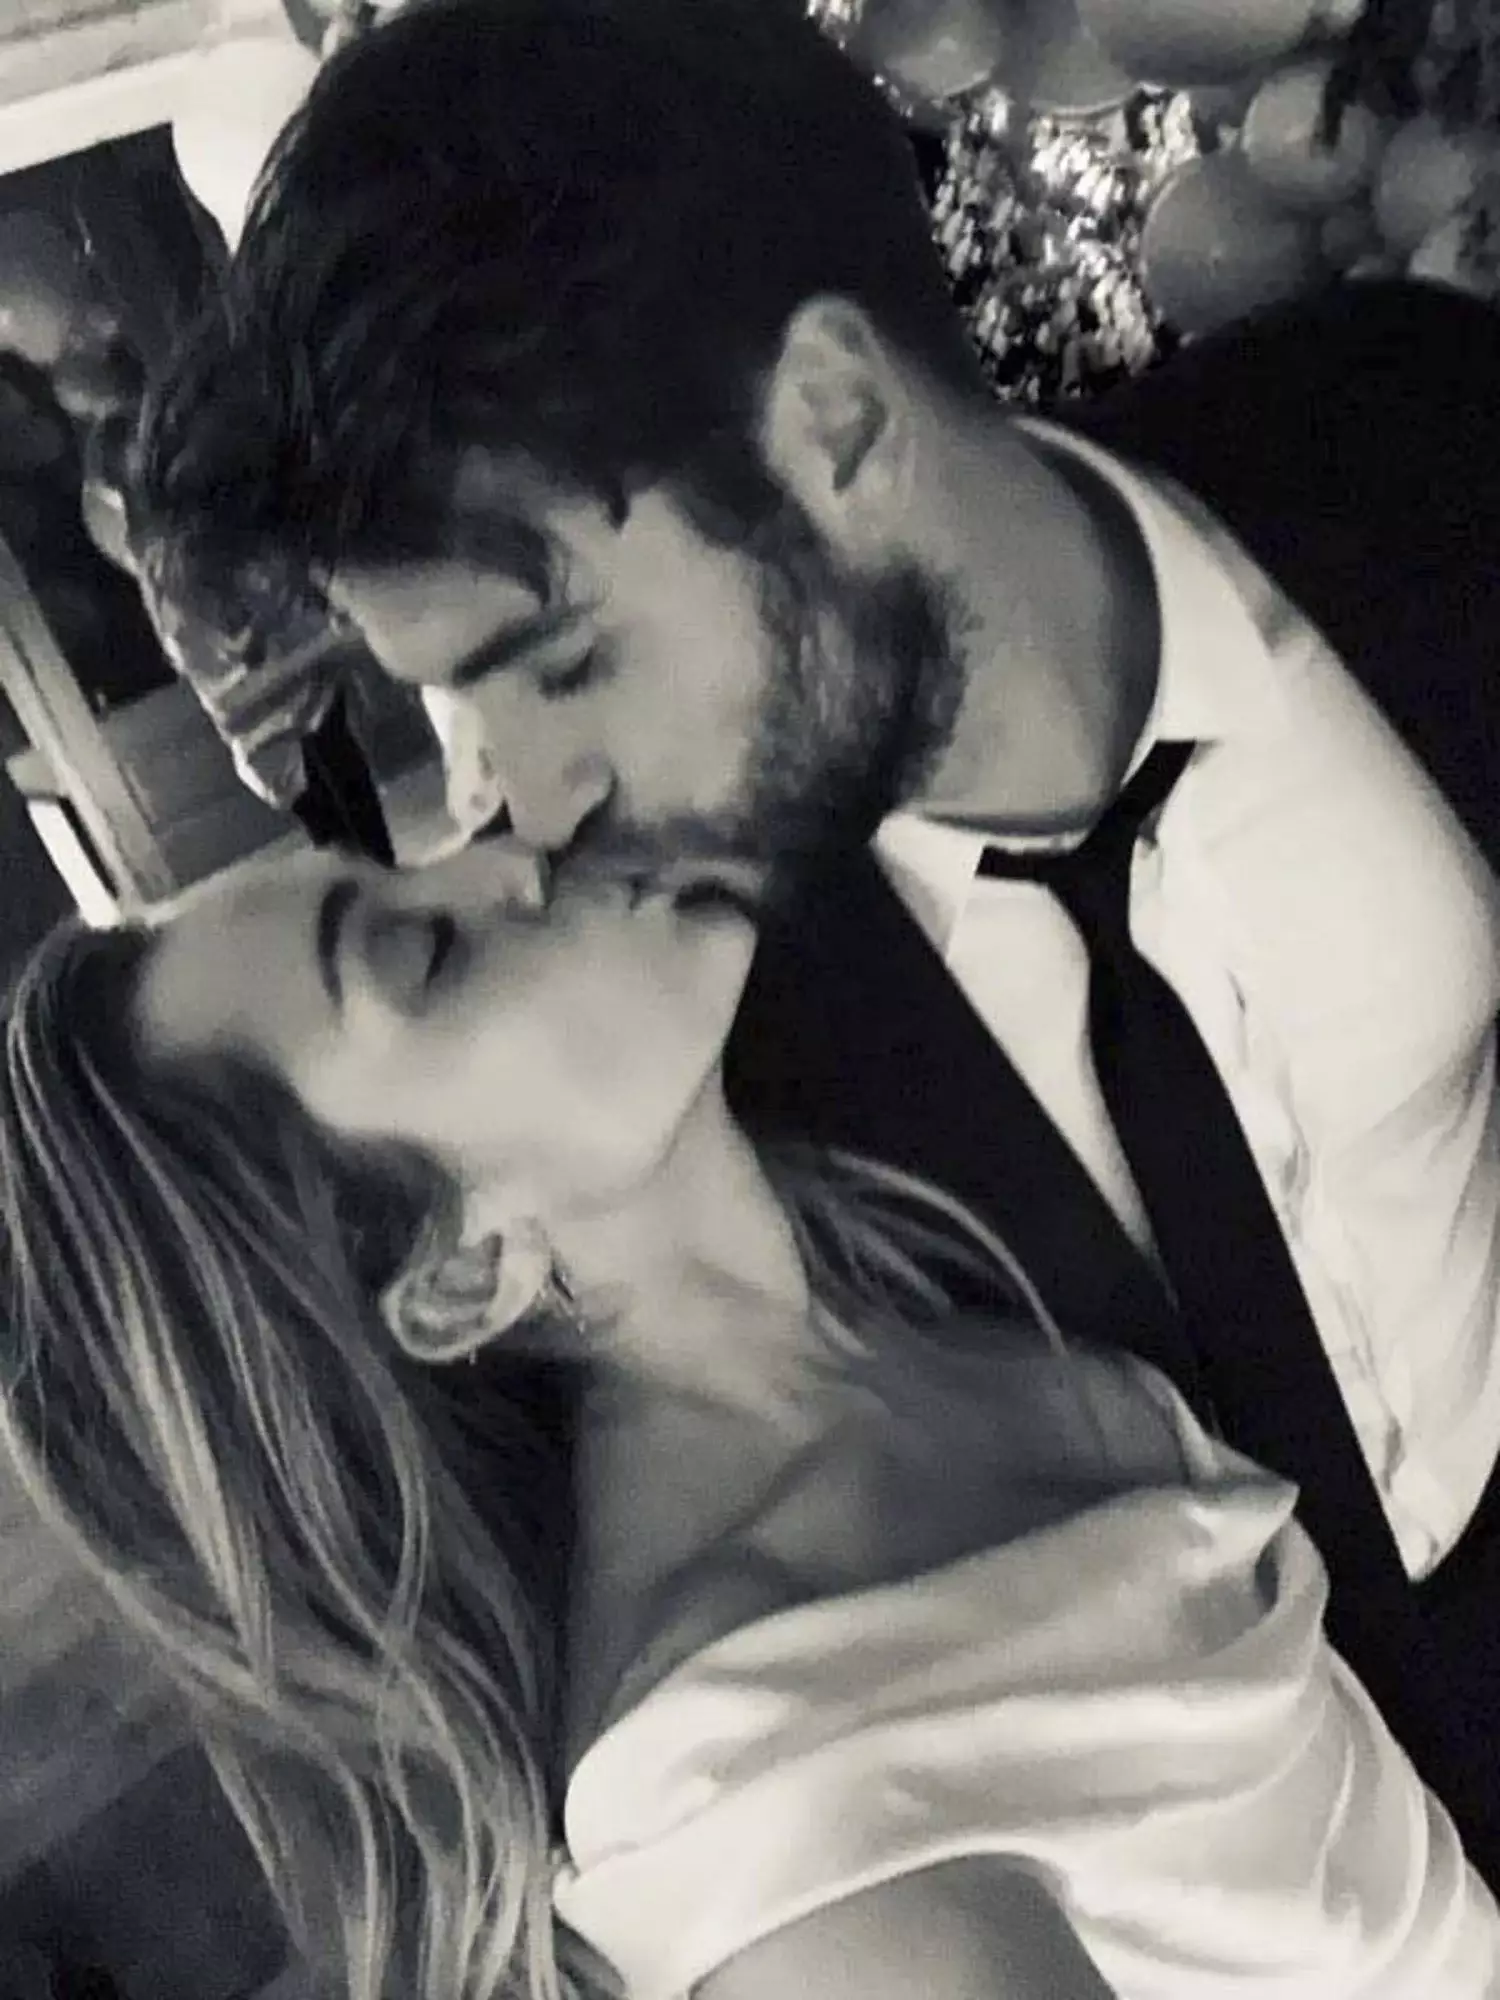 Miley and Liam tied the knot in 2018 (